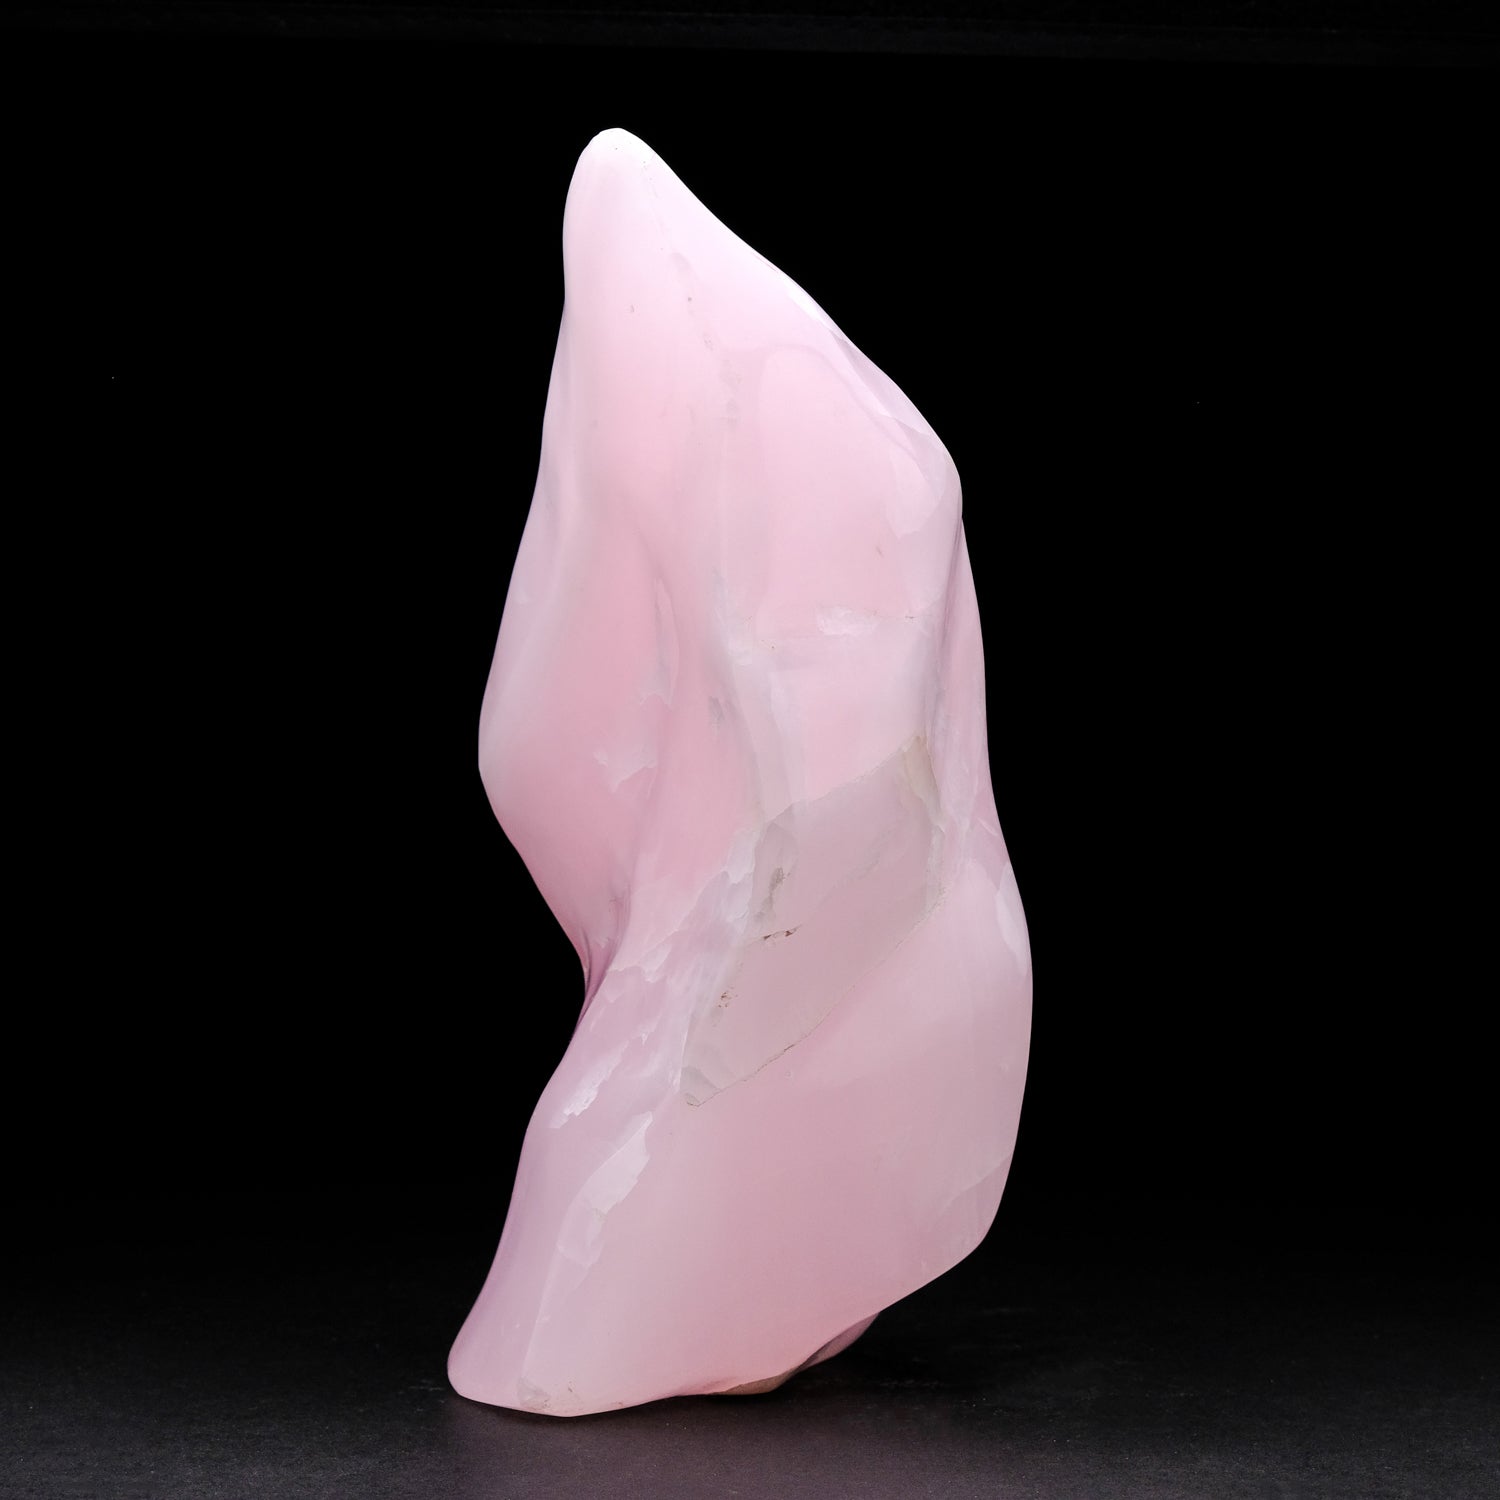 Polished Pink Mangano Calcite from Pakistan (9.2 lbs)